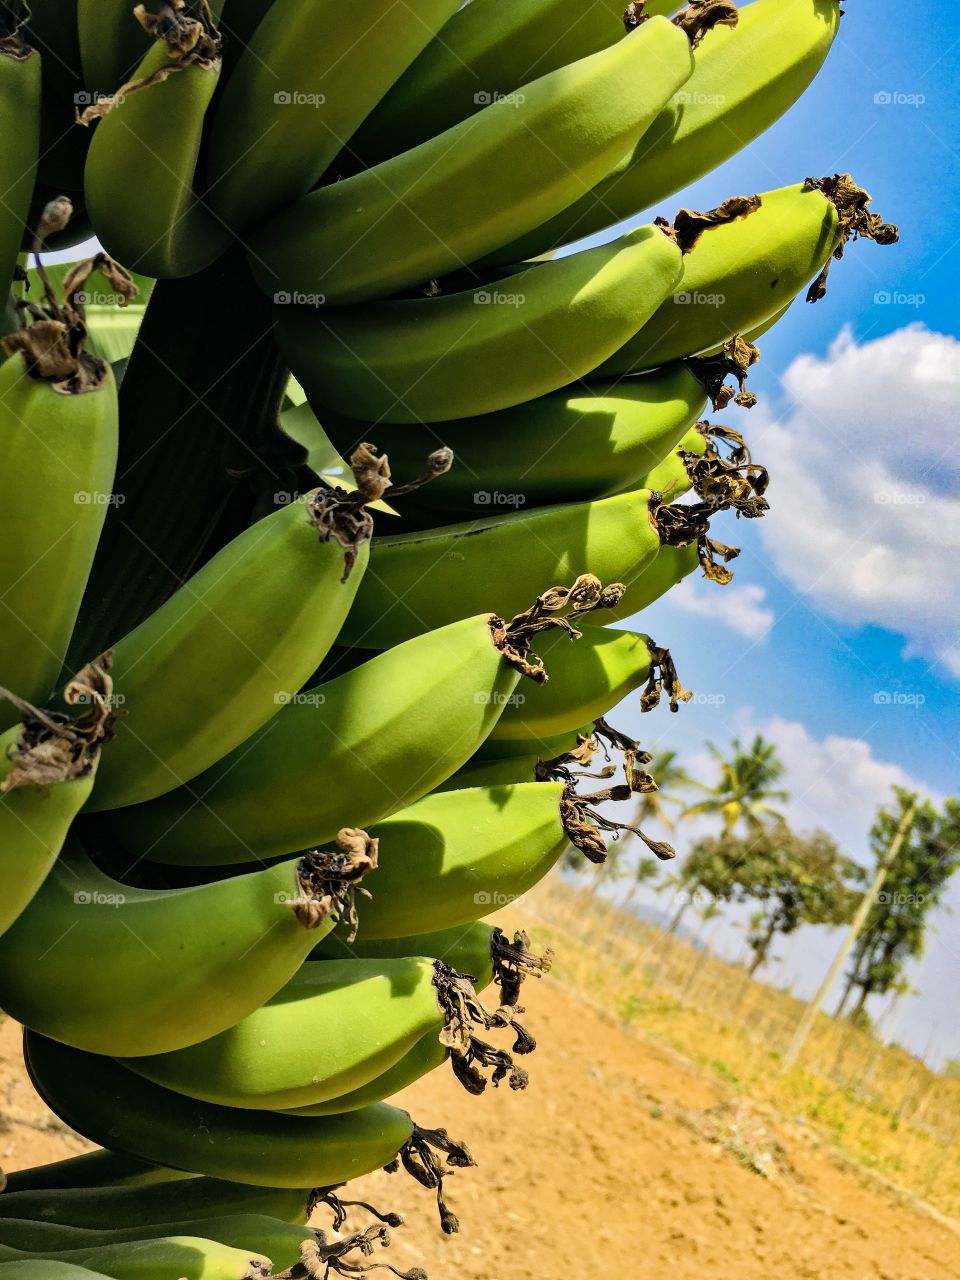 Green Bananas in my farm waiting them to ripe